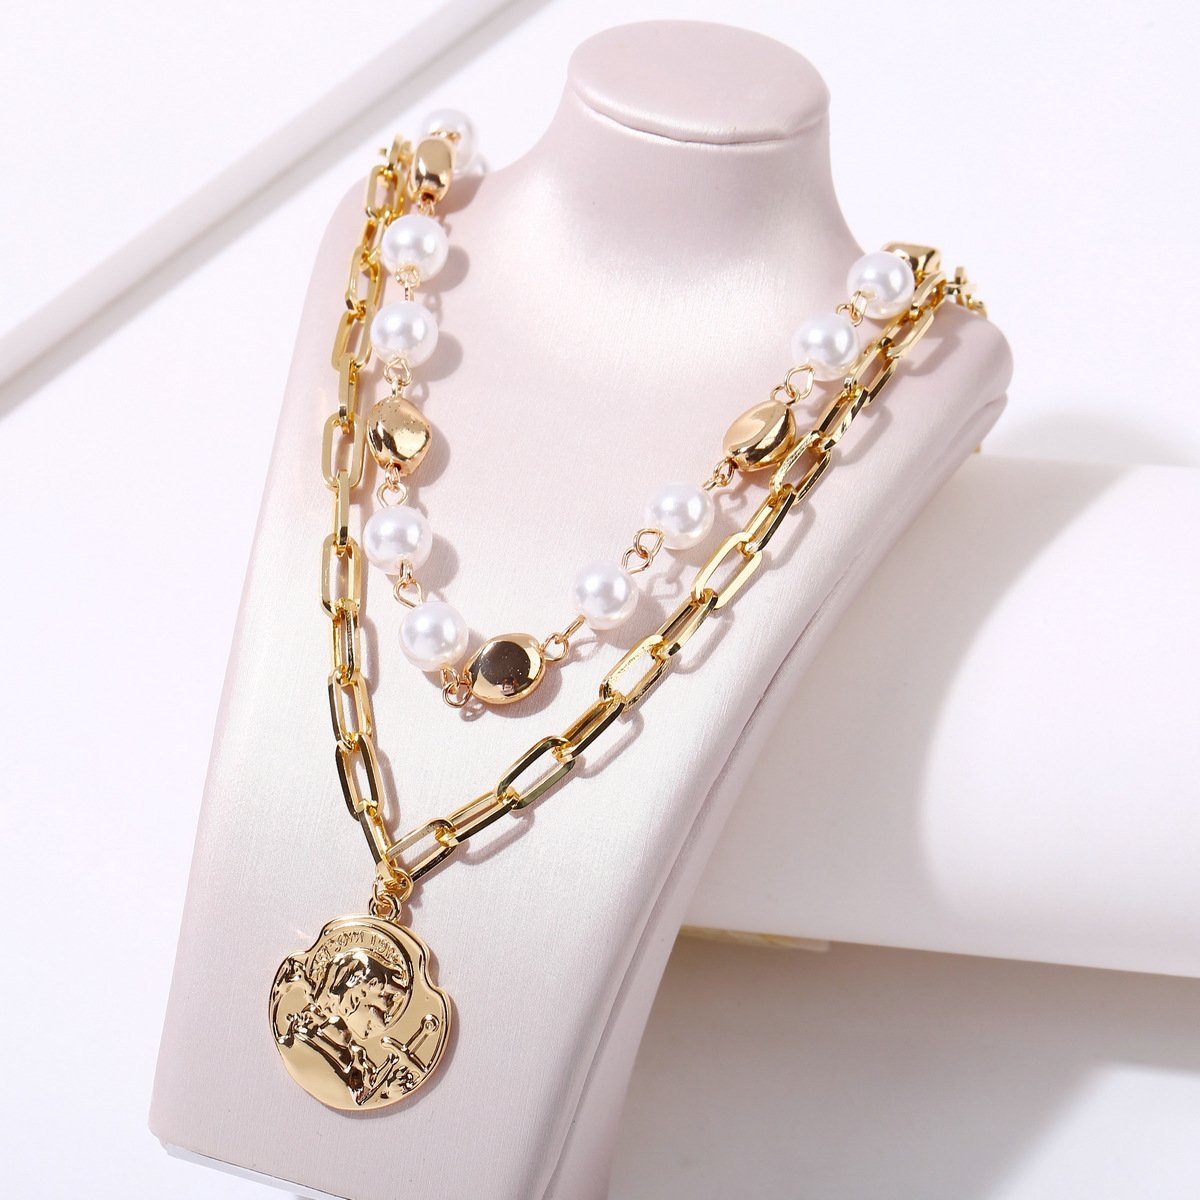 2 Piece Pearl Coin Head Necklace 18K Gold Plated Necklace ITALY Design Elsy Style Necklace